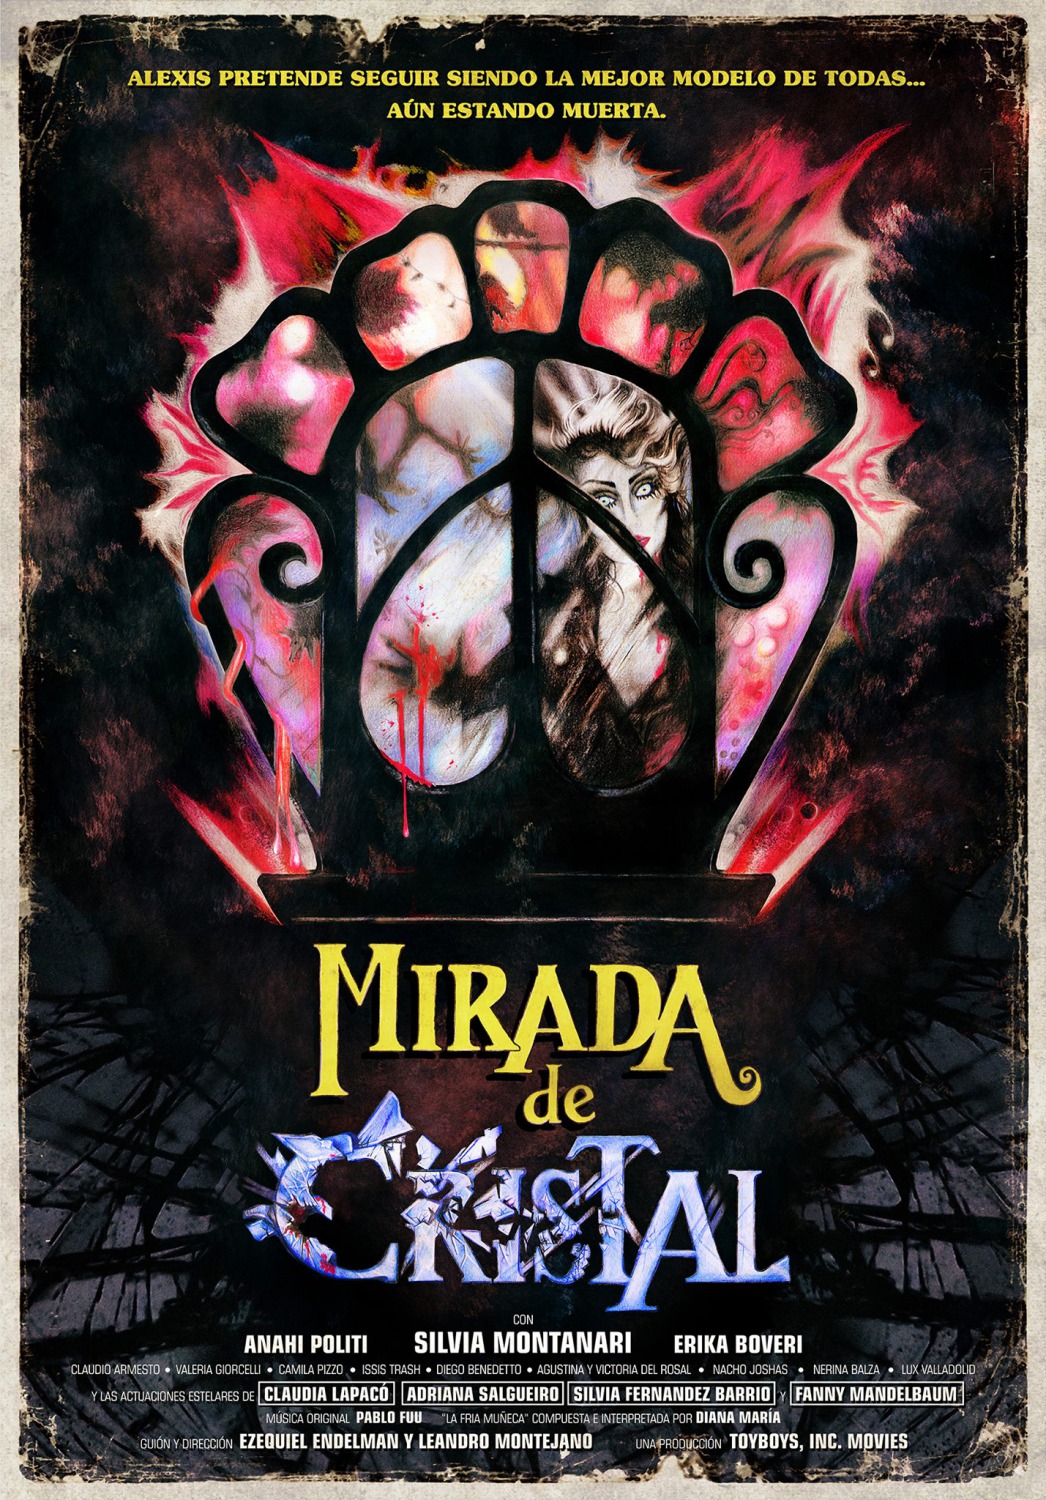 Extra Large Movie Poster Image for Mirada de cristal 